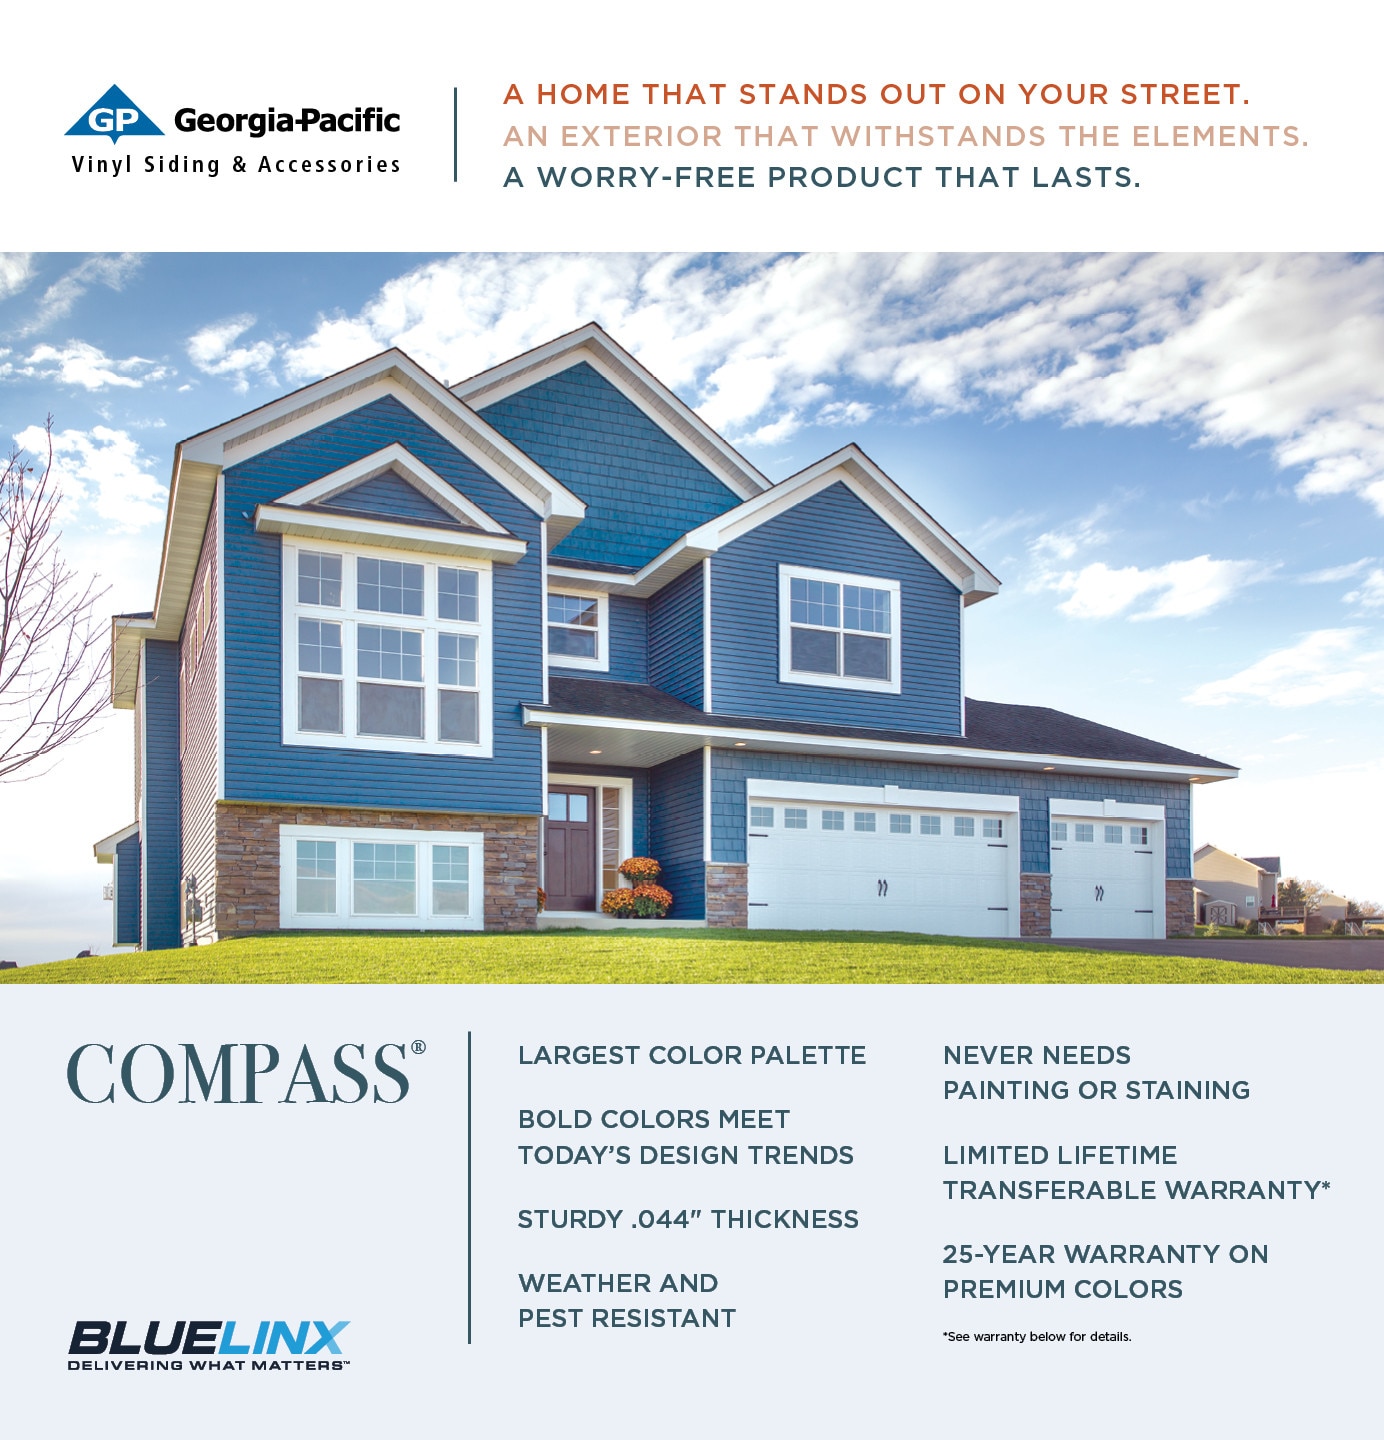 KP Vinyl Siding - Mystic Blue is a stunning blue shade fit for any